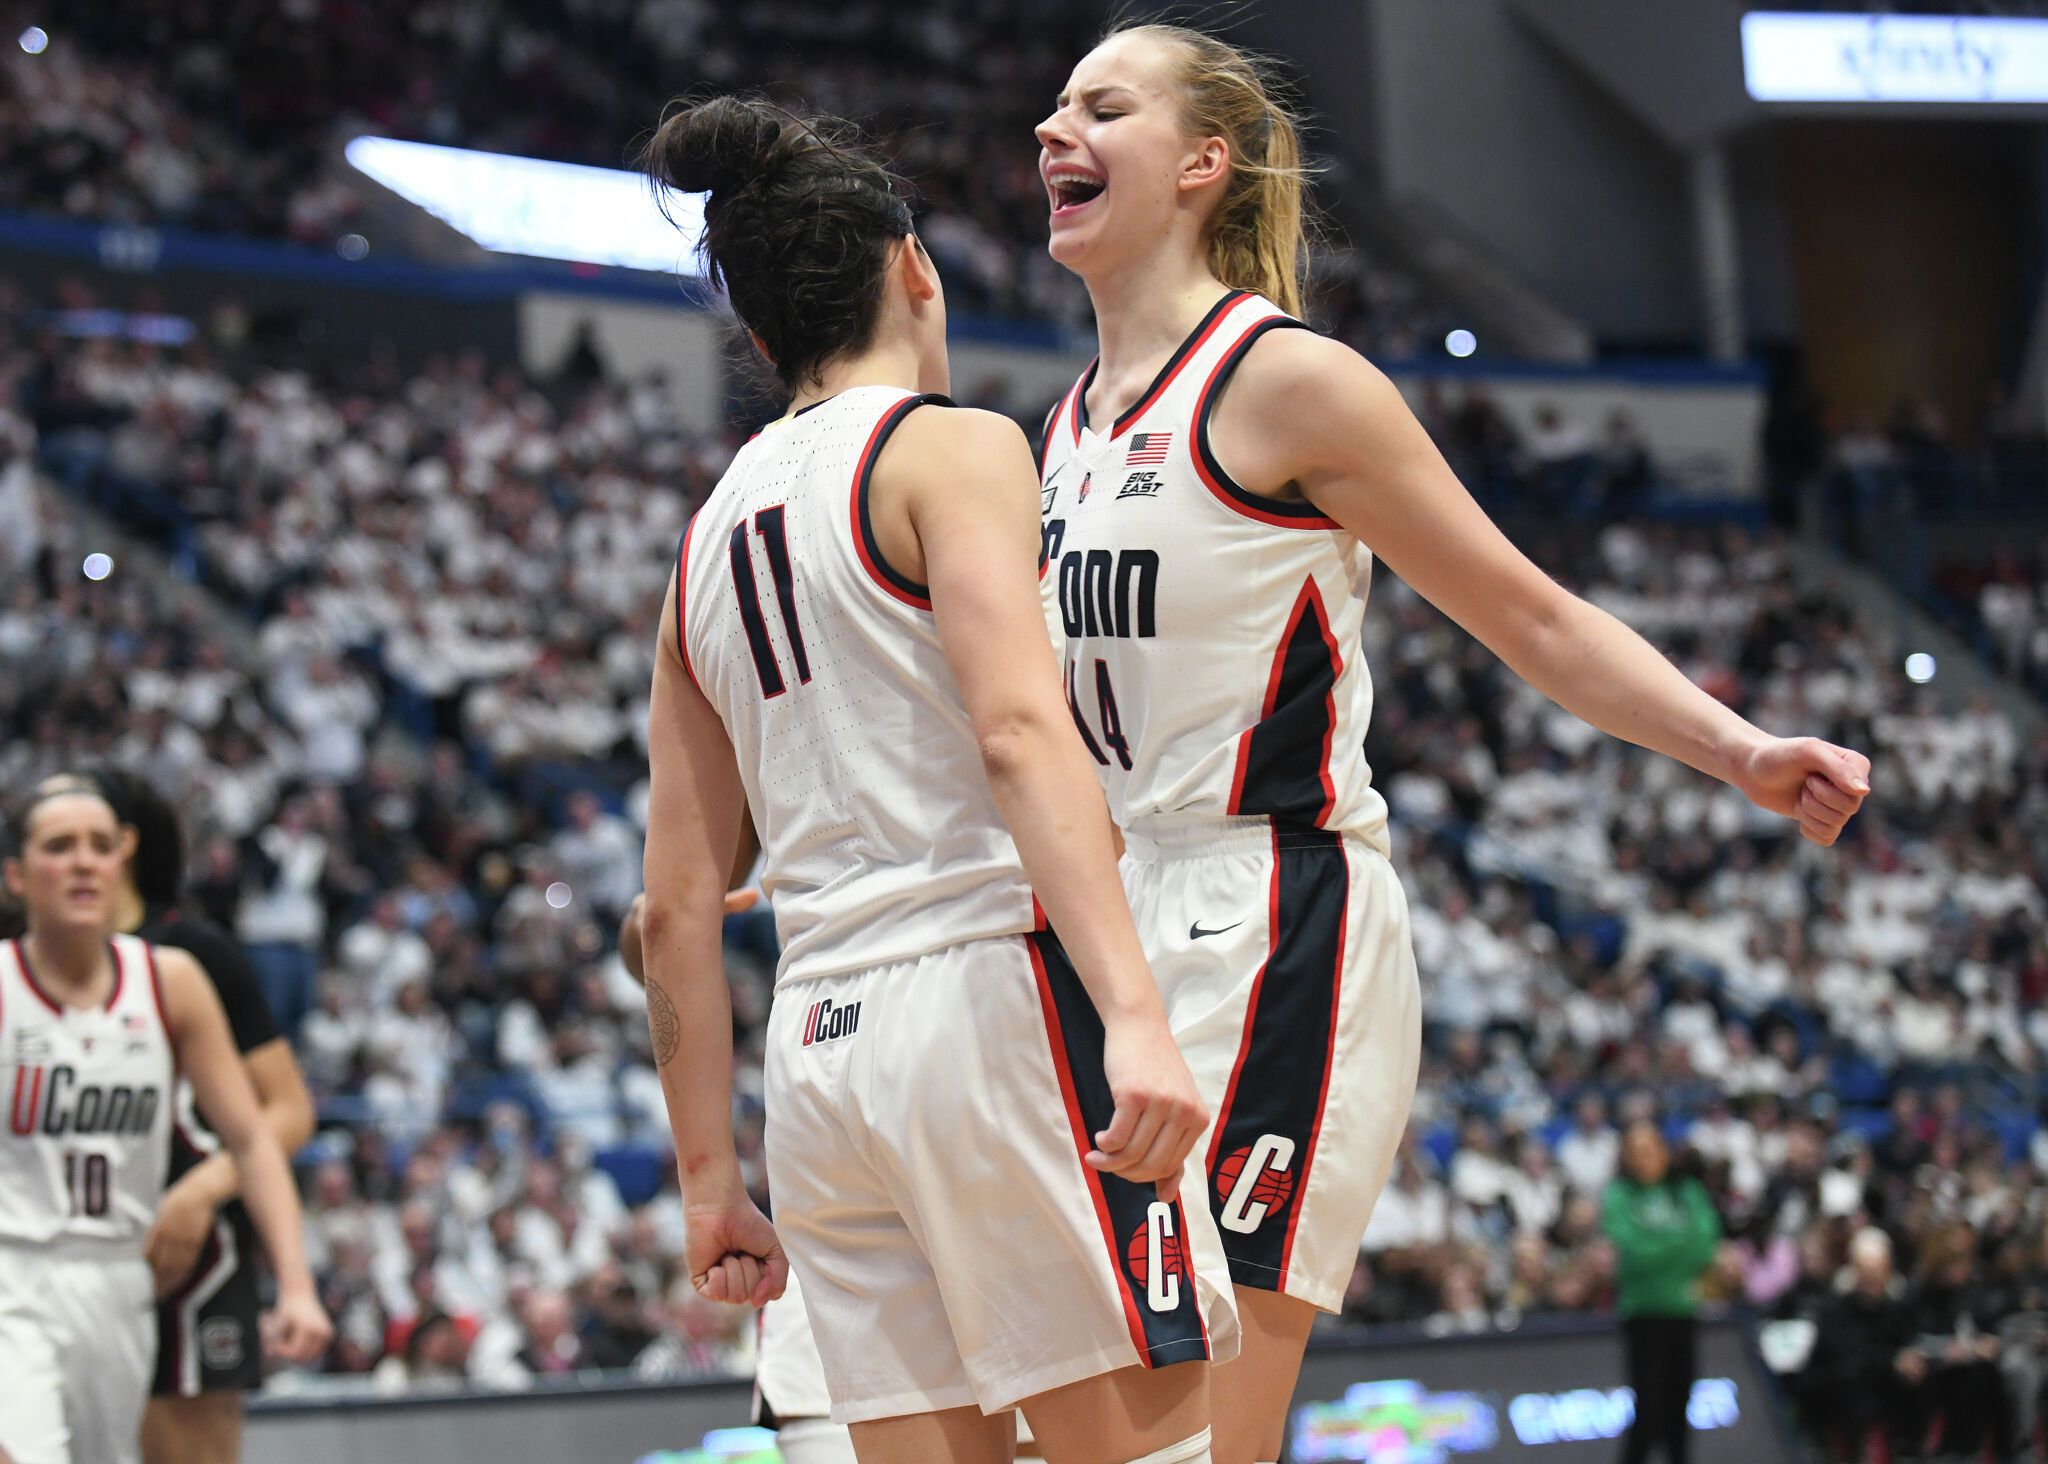 UConn women's basketball moves up to No. 4 in AP Top 25